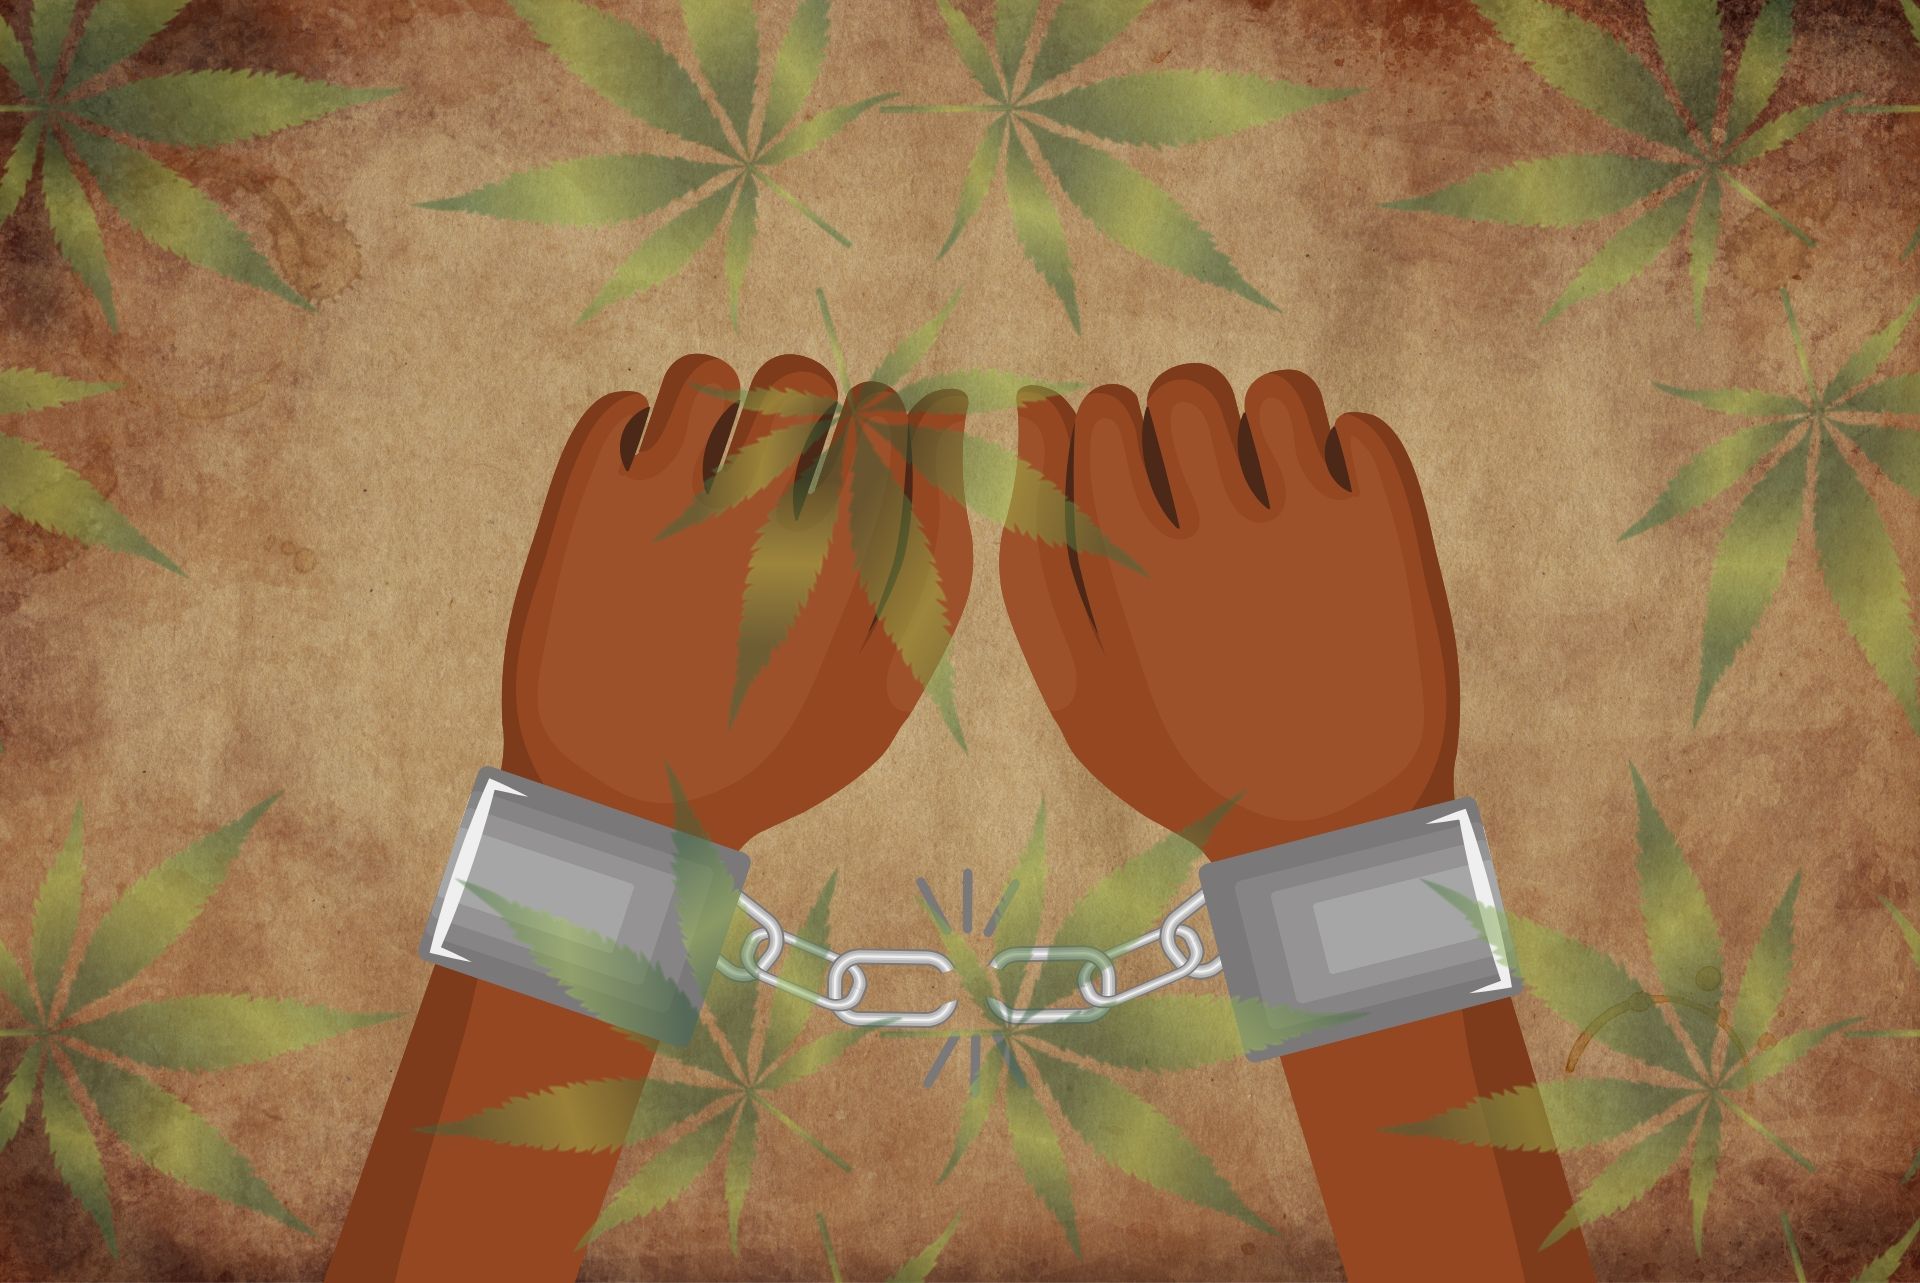 graphic of arrested hands with hemp leaf an rustic background